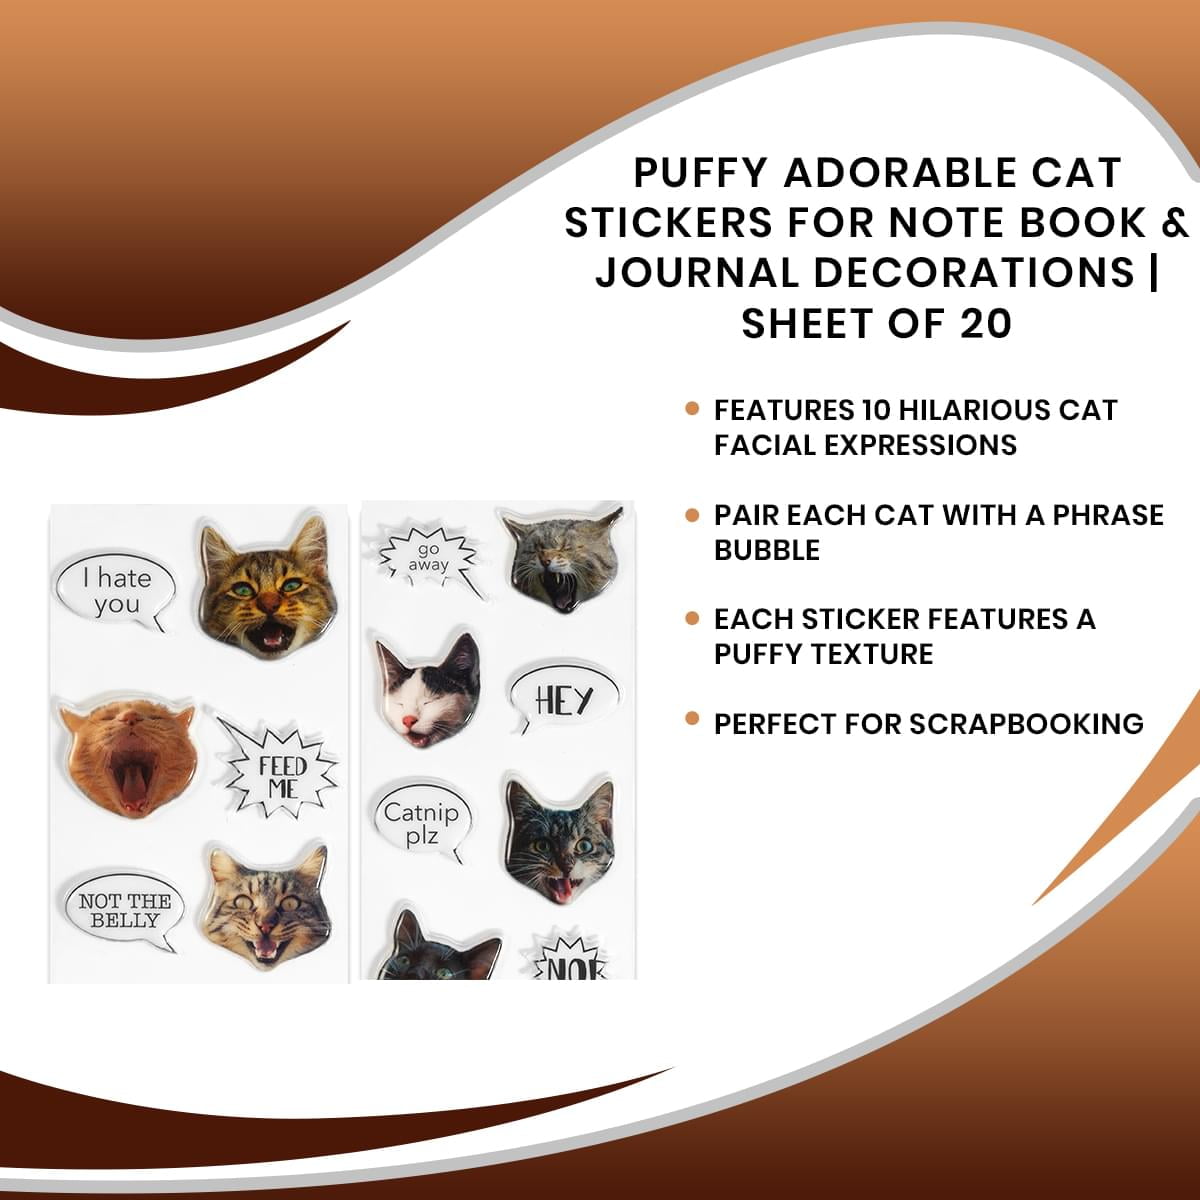 Made some precut reading journal stickers with these adorable cats